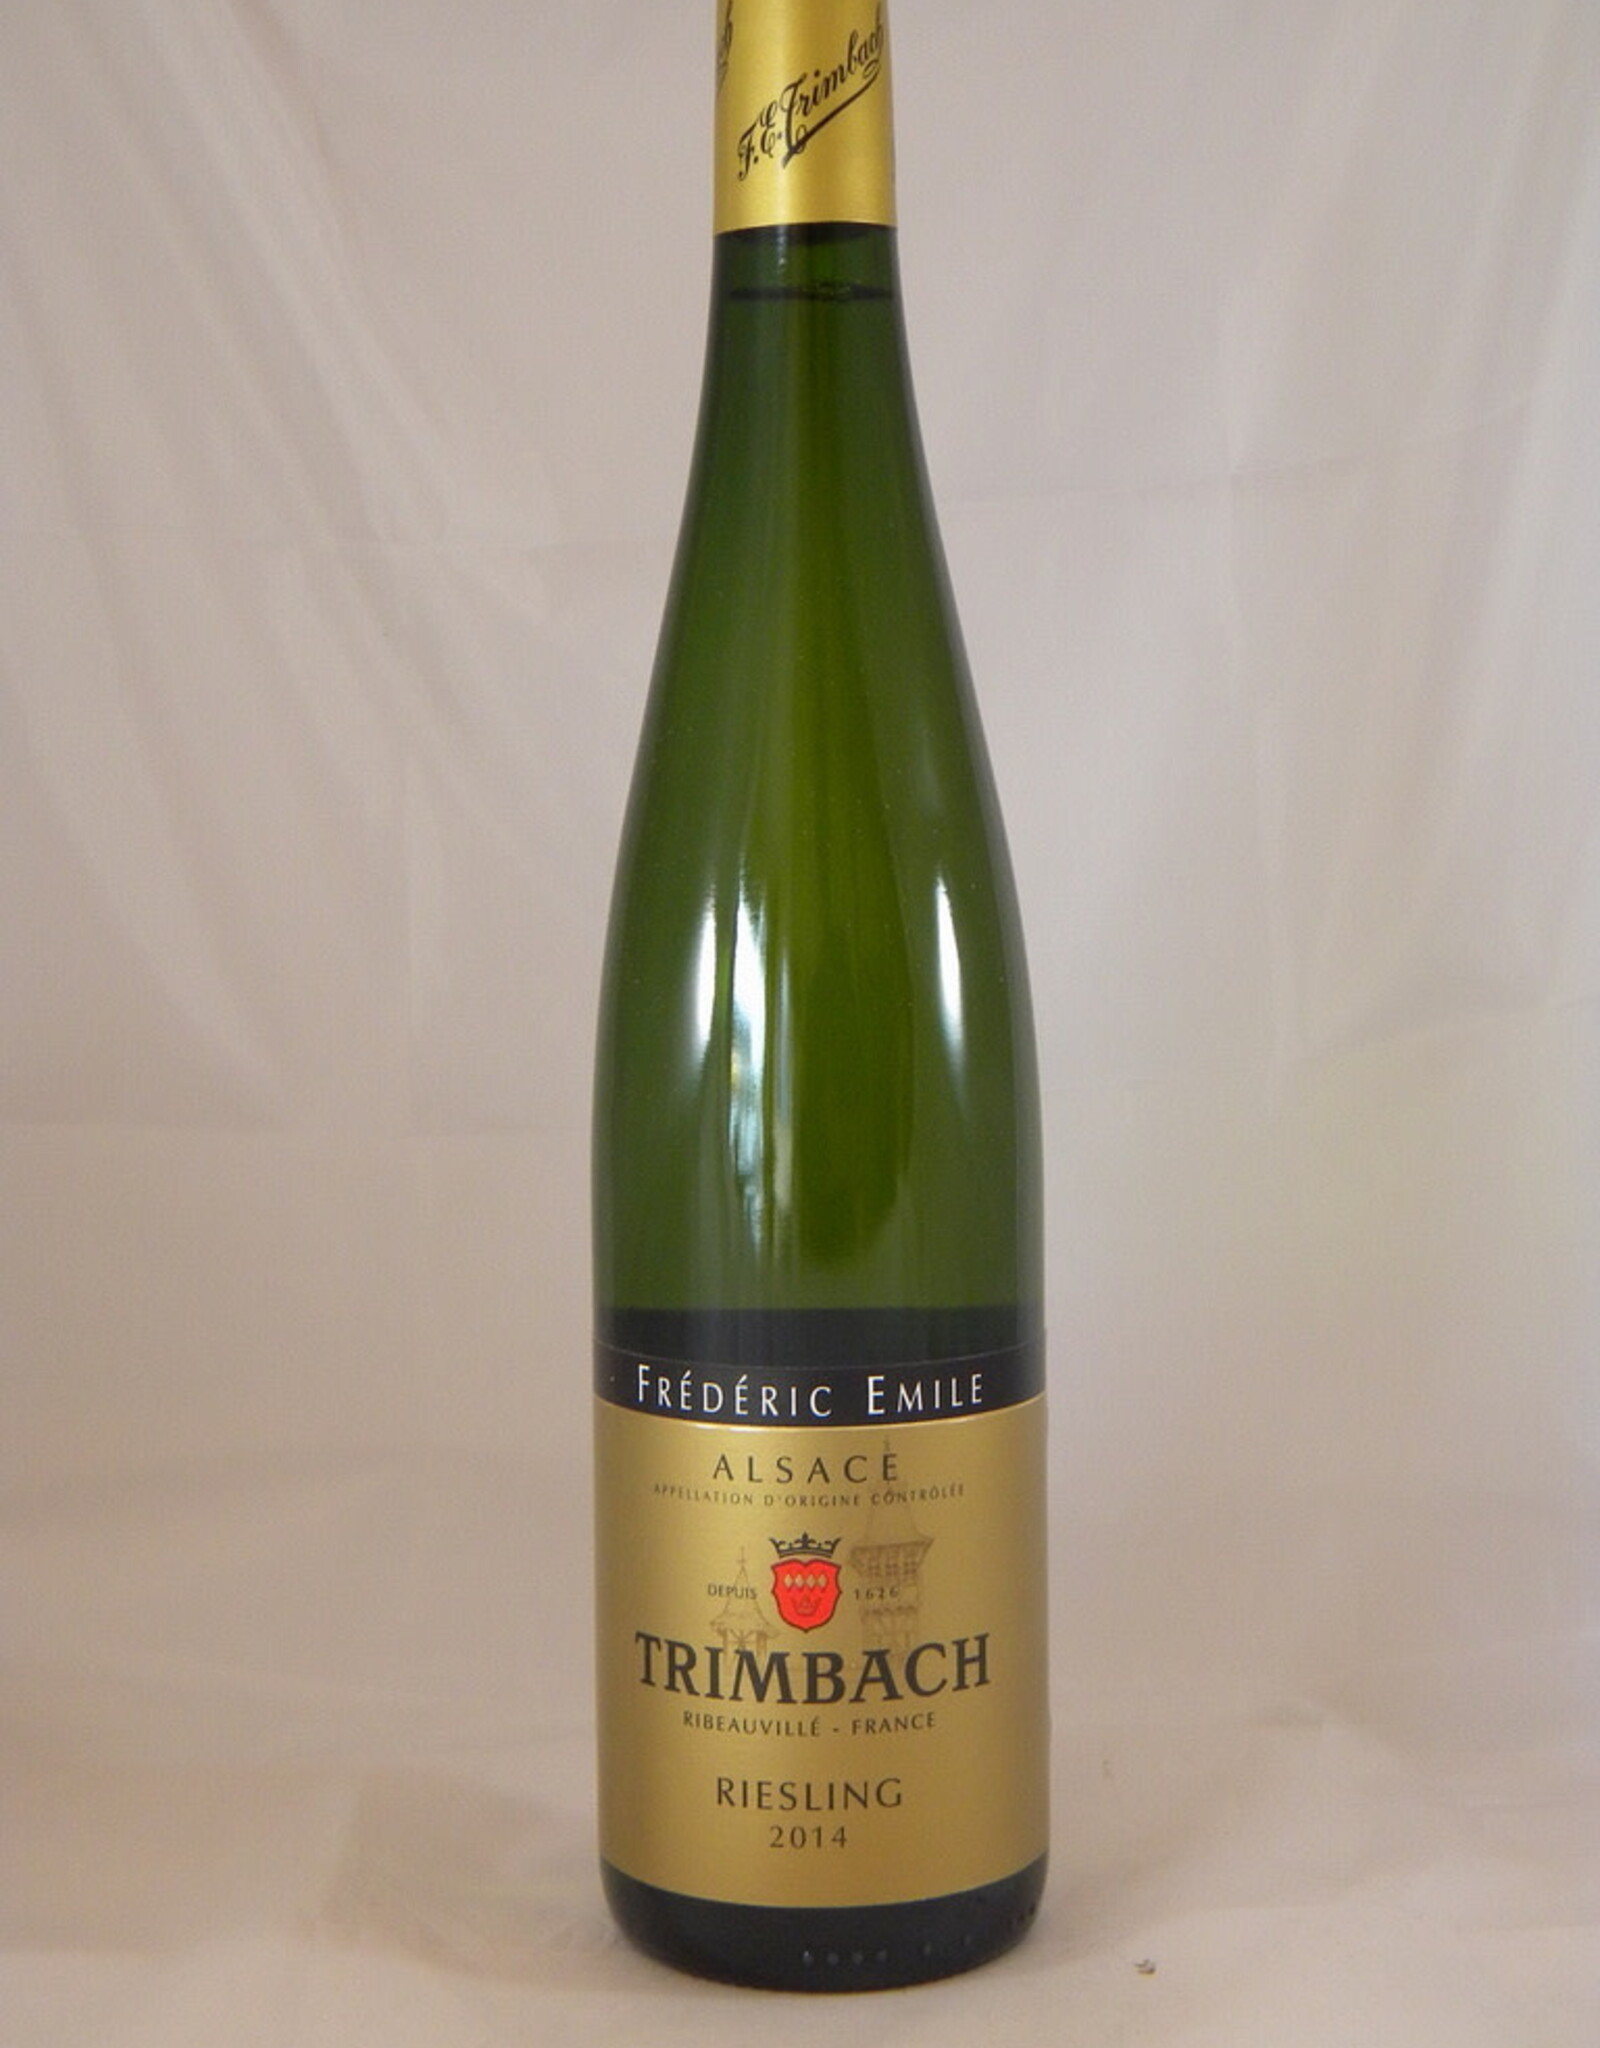 Trimbach Riesling Alsace Frederic Emile 2014